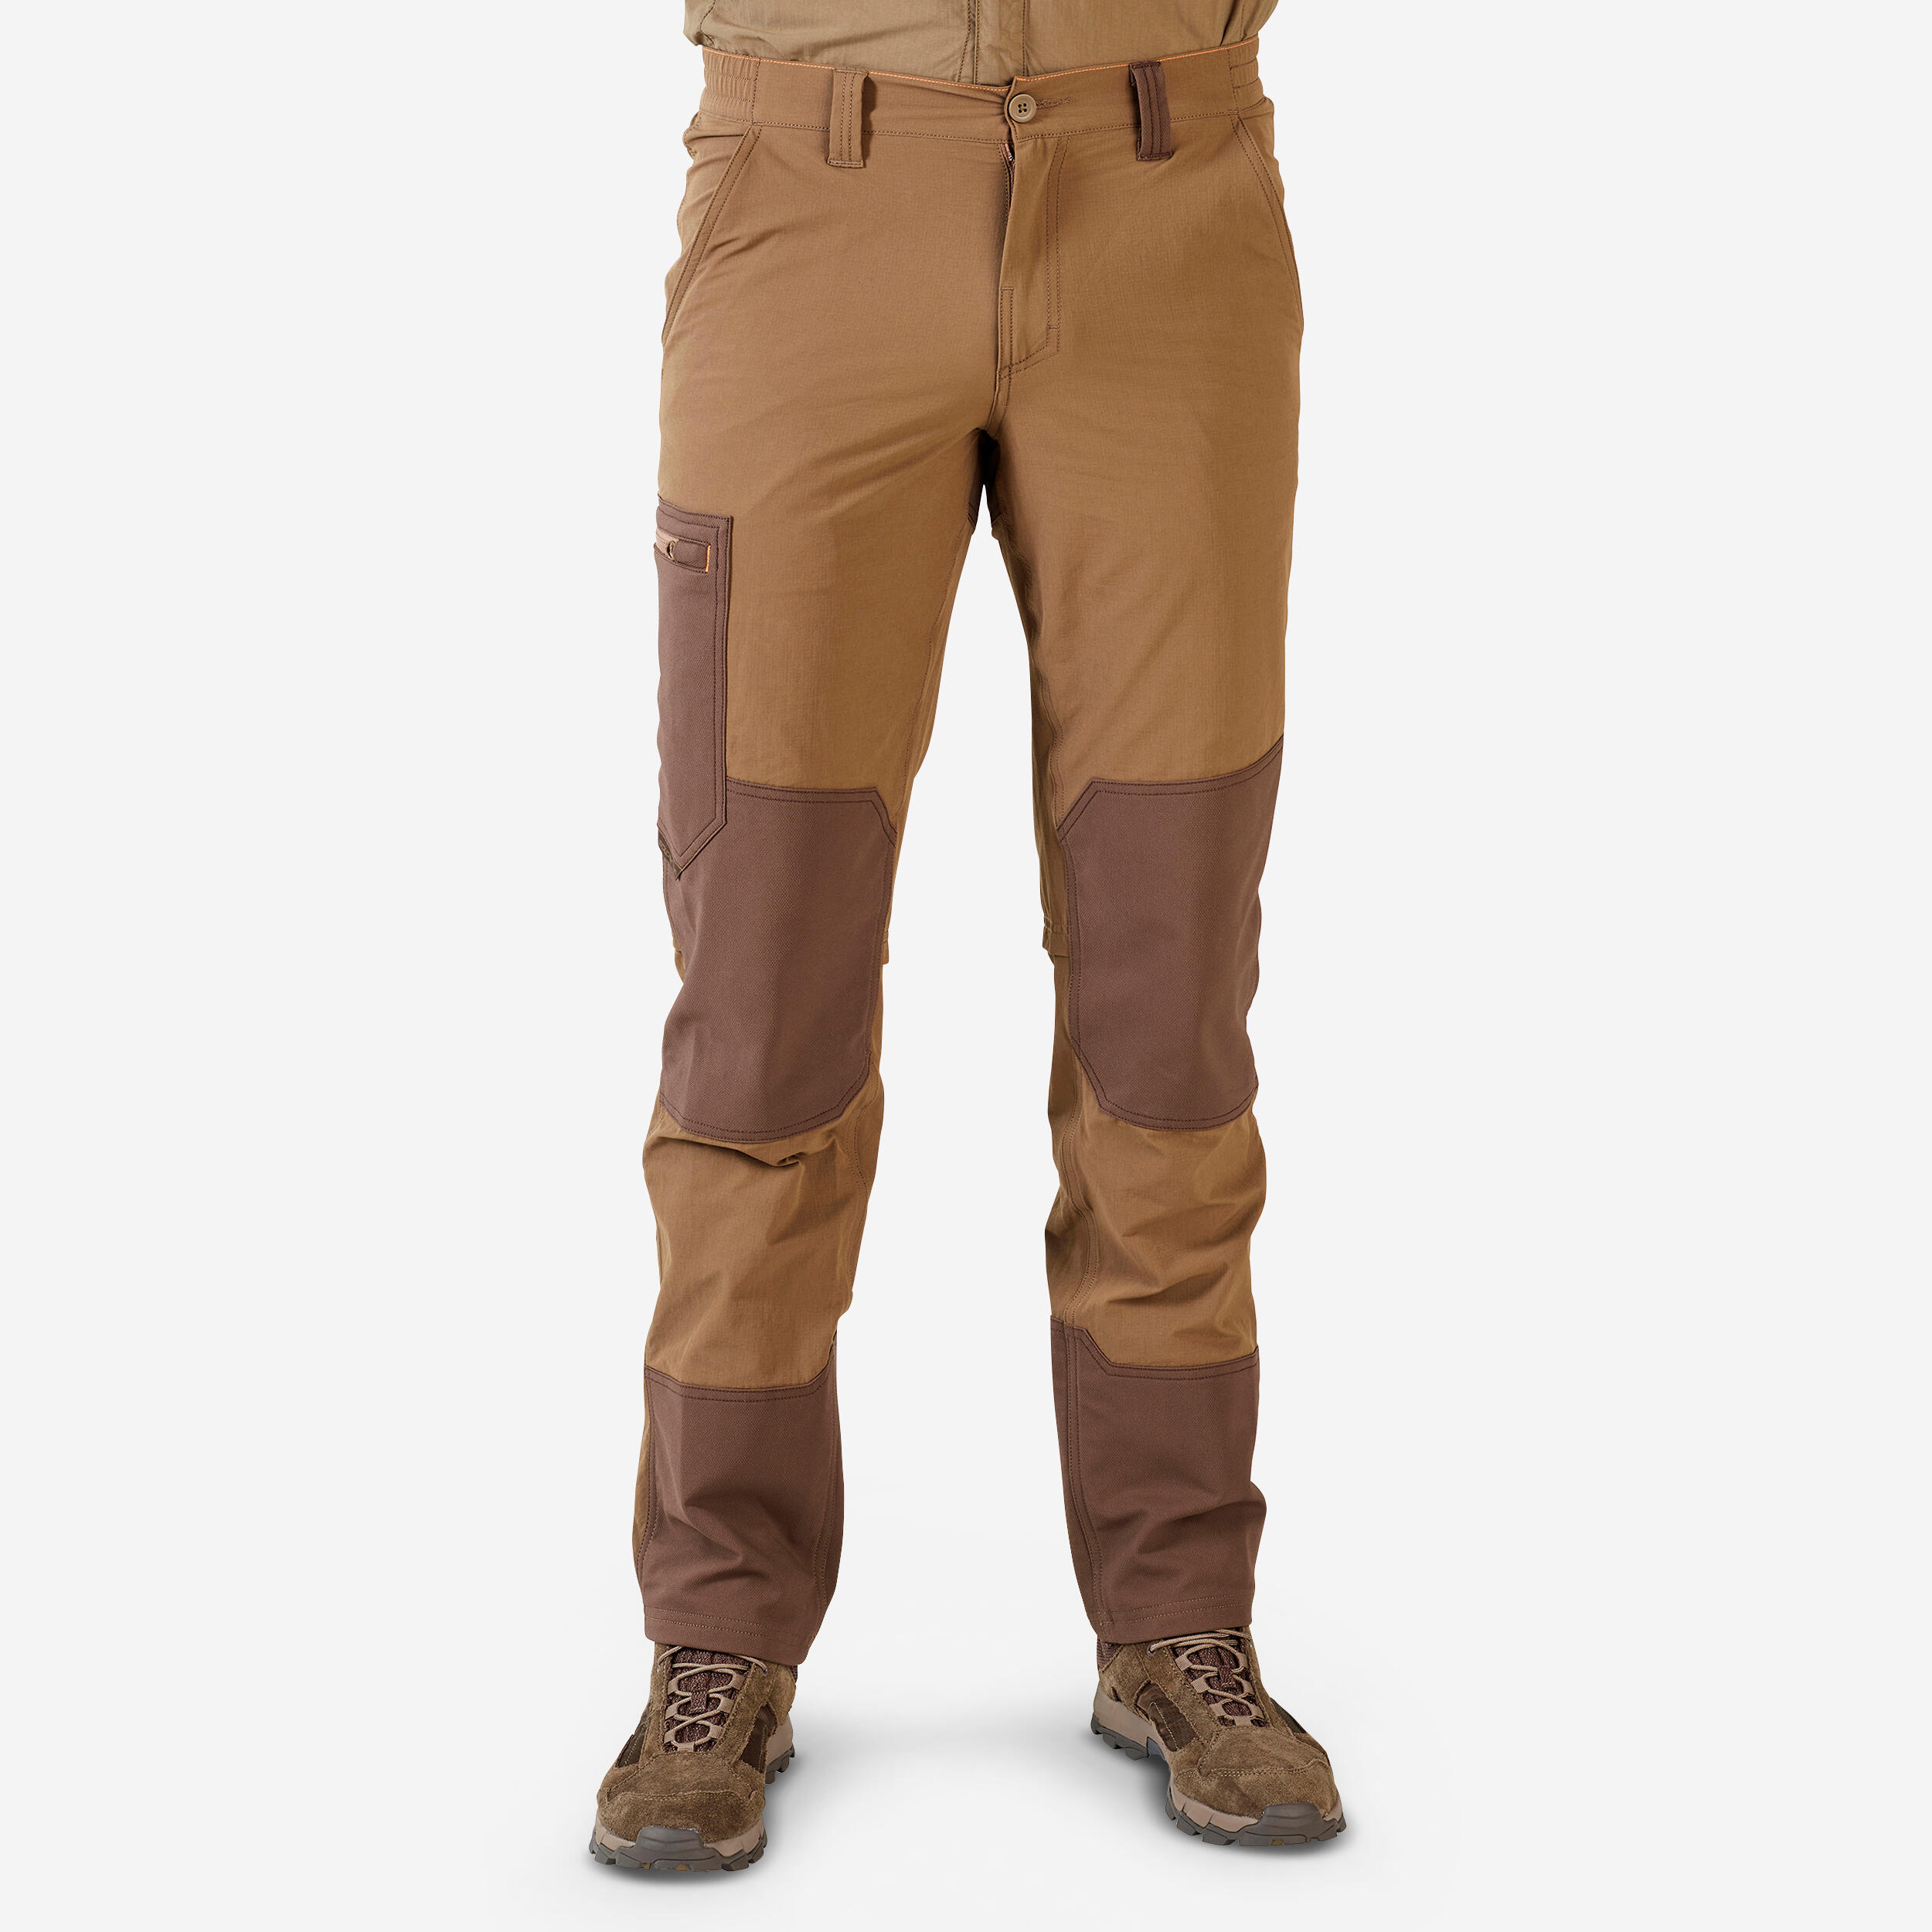 Men's Country Sport Resistant Breathable Trousers - Steppe 900 Green -  Decathlon